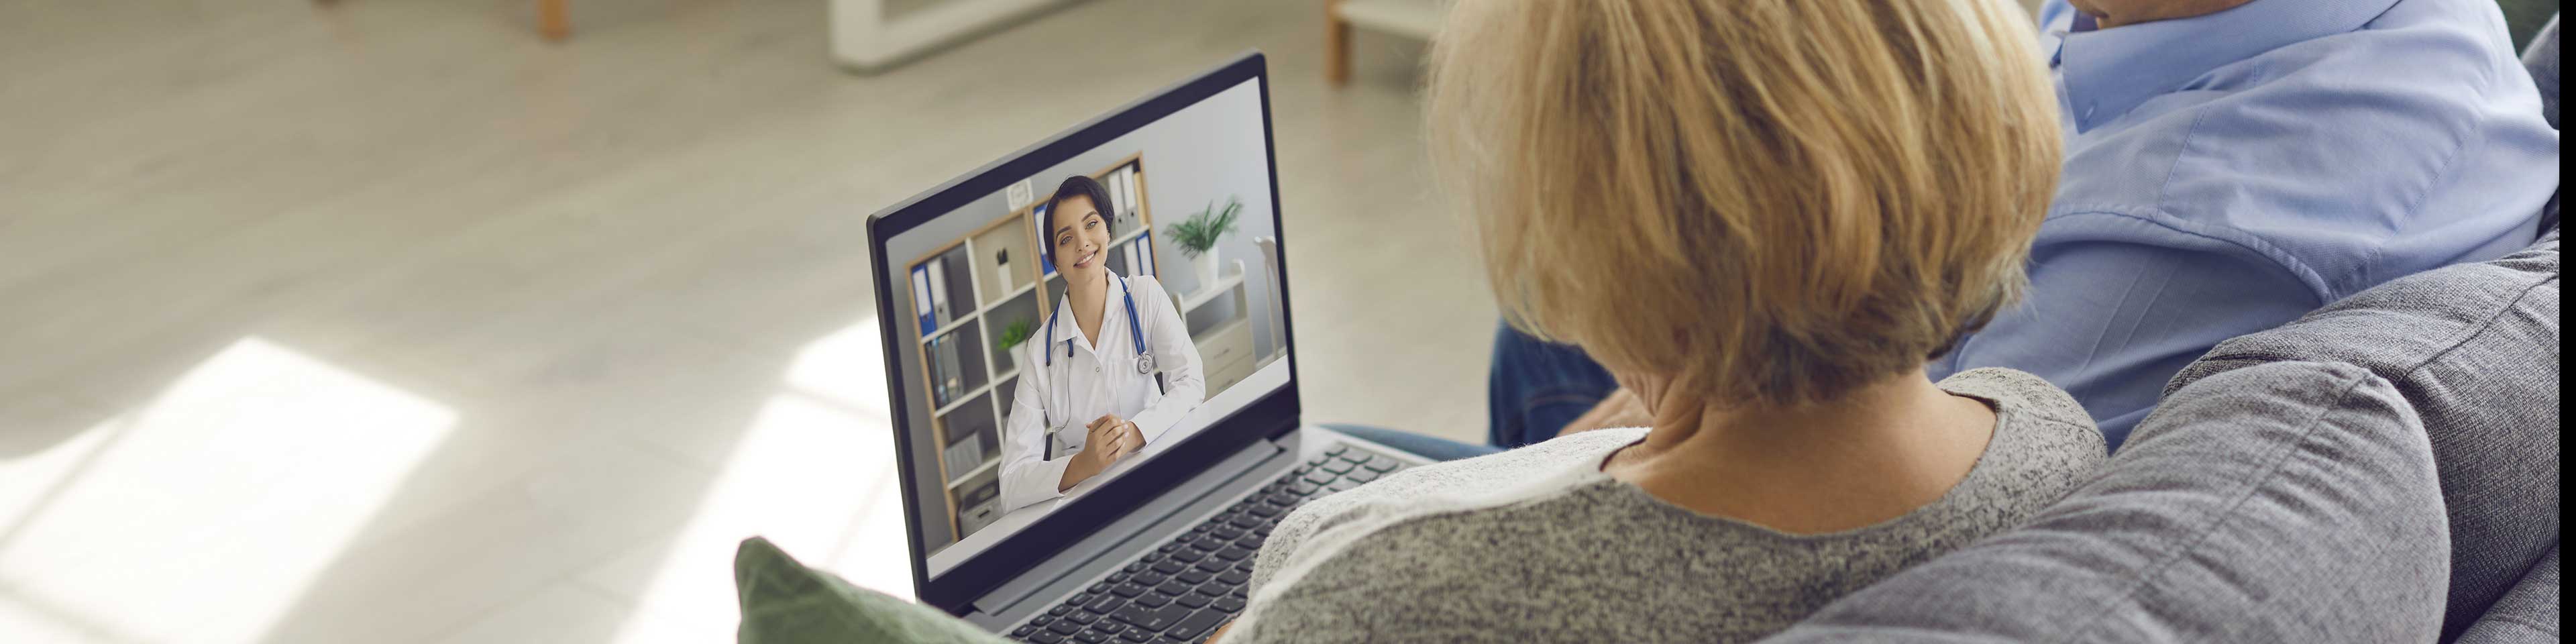 Florida’s out-of-state telehealth registration law